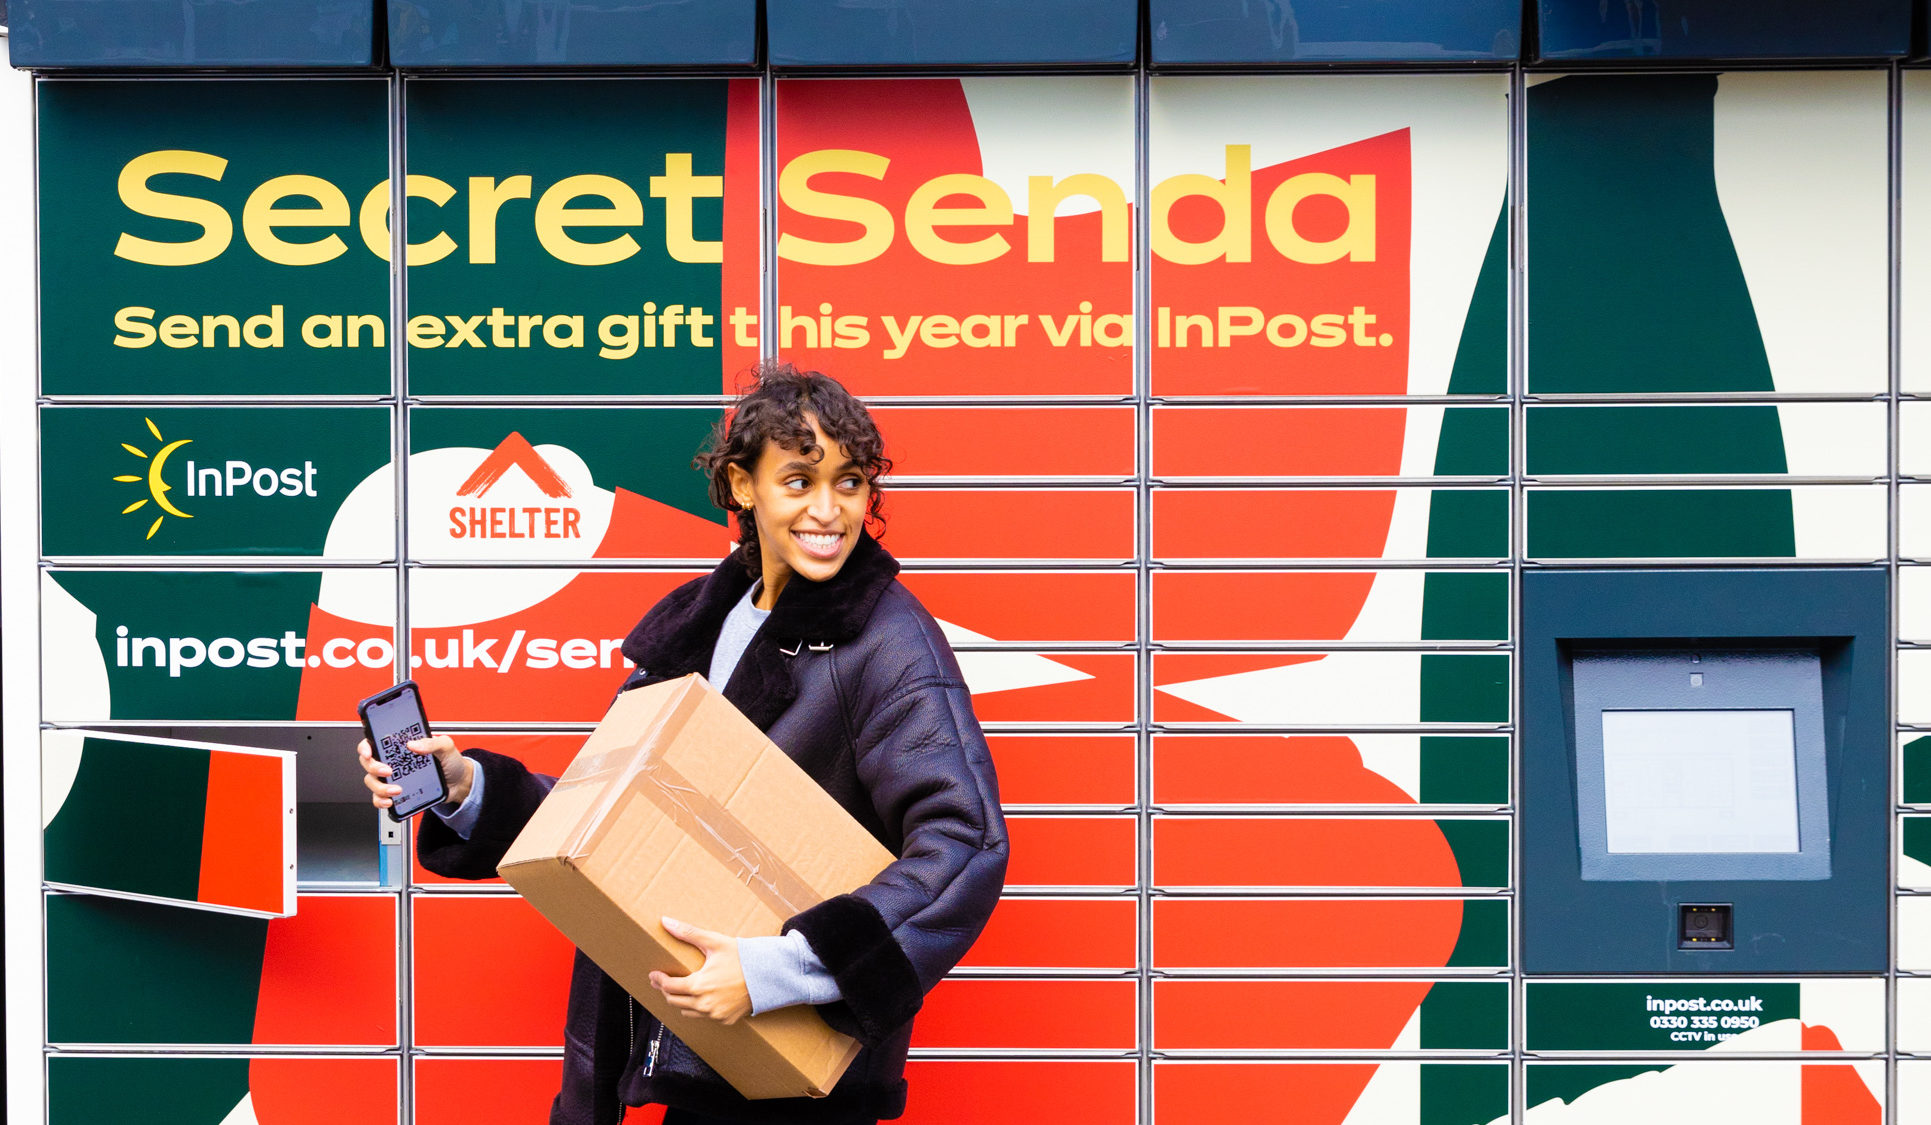 InPost partners with Shelter to offer free deliveries for donations this festive season